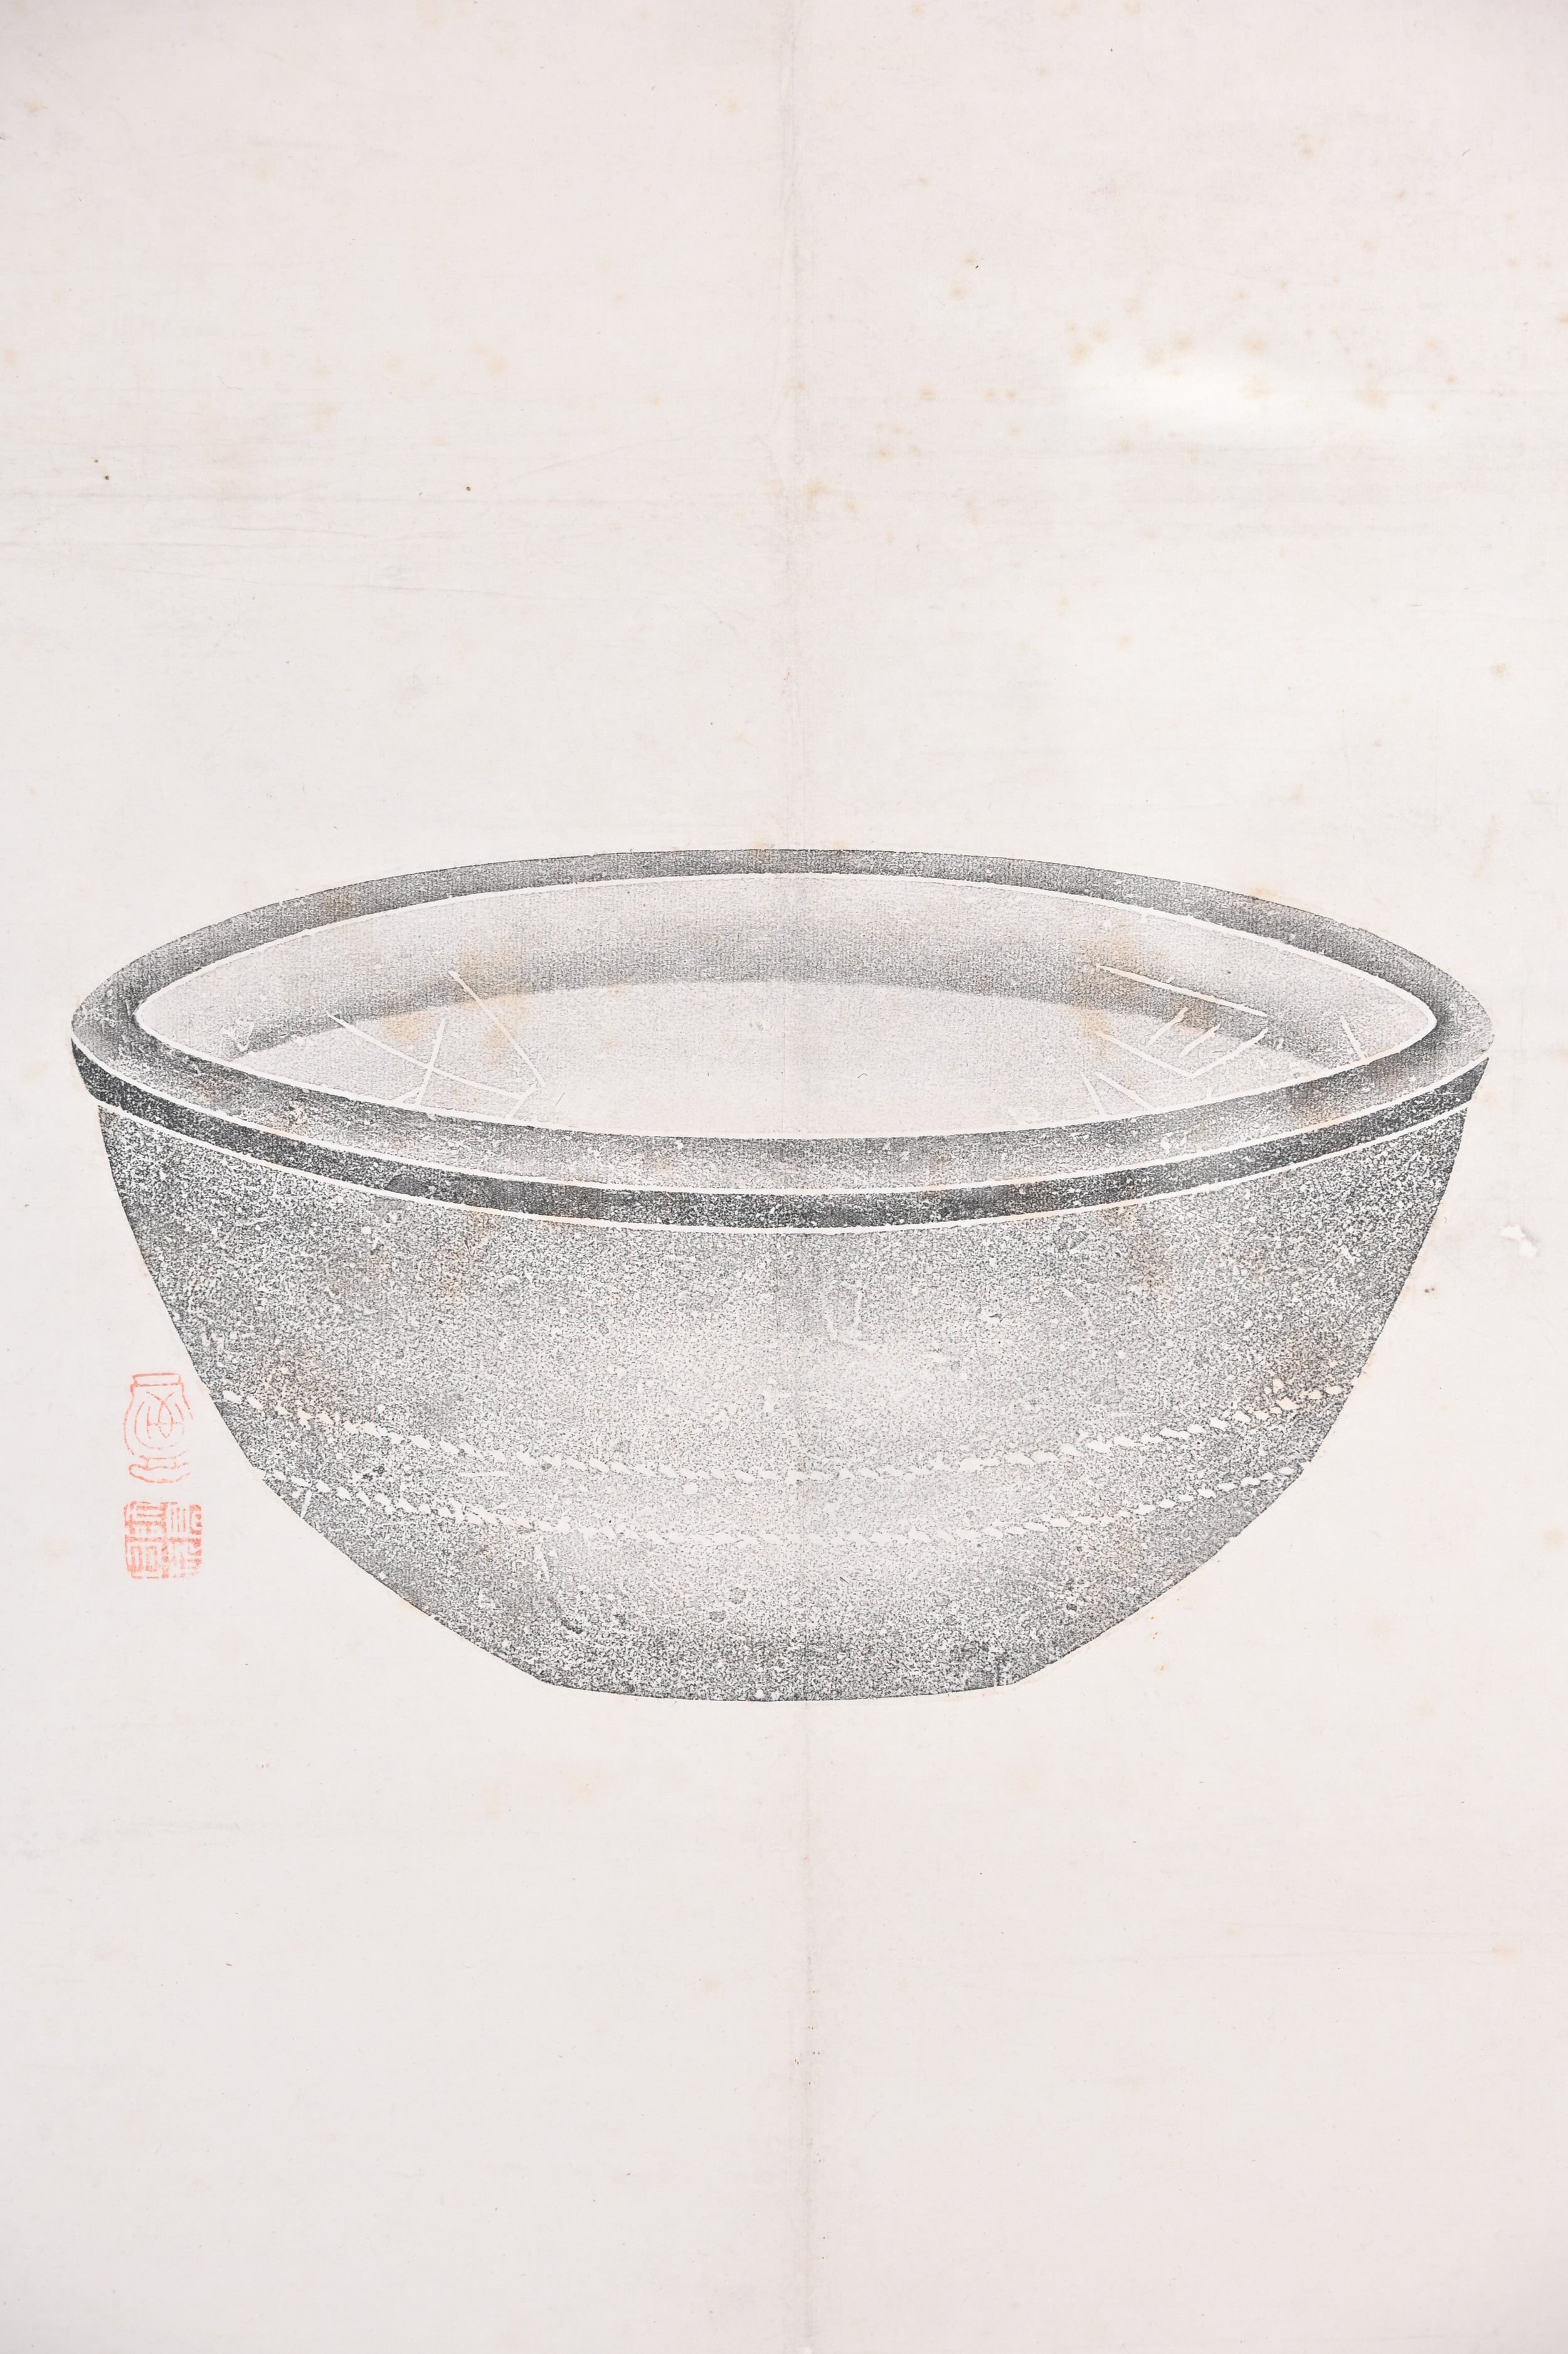 CHEN JIEQI (1813-1884) - Ink rubbing of a bronze bowl and characters on paper, with authentication - Image 4 of 5